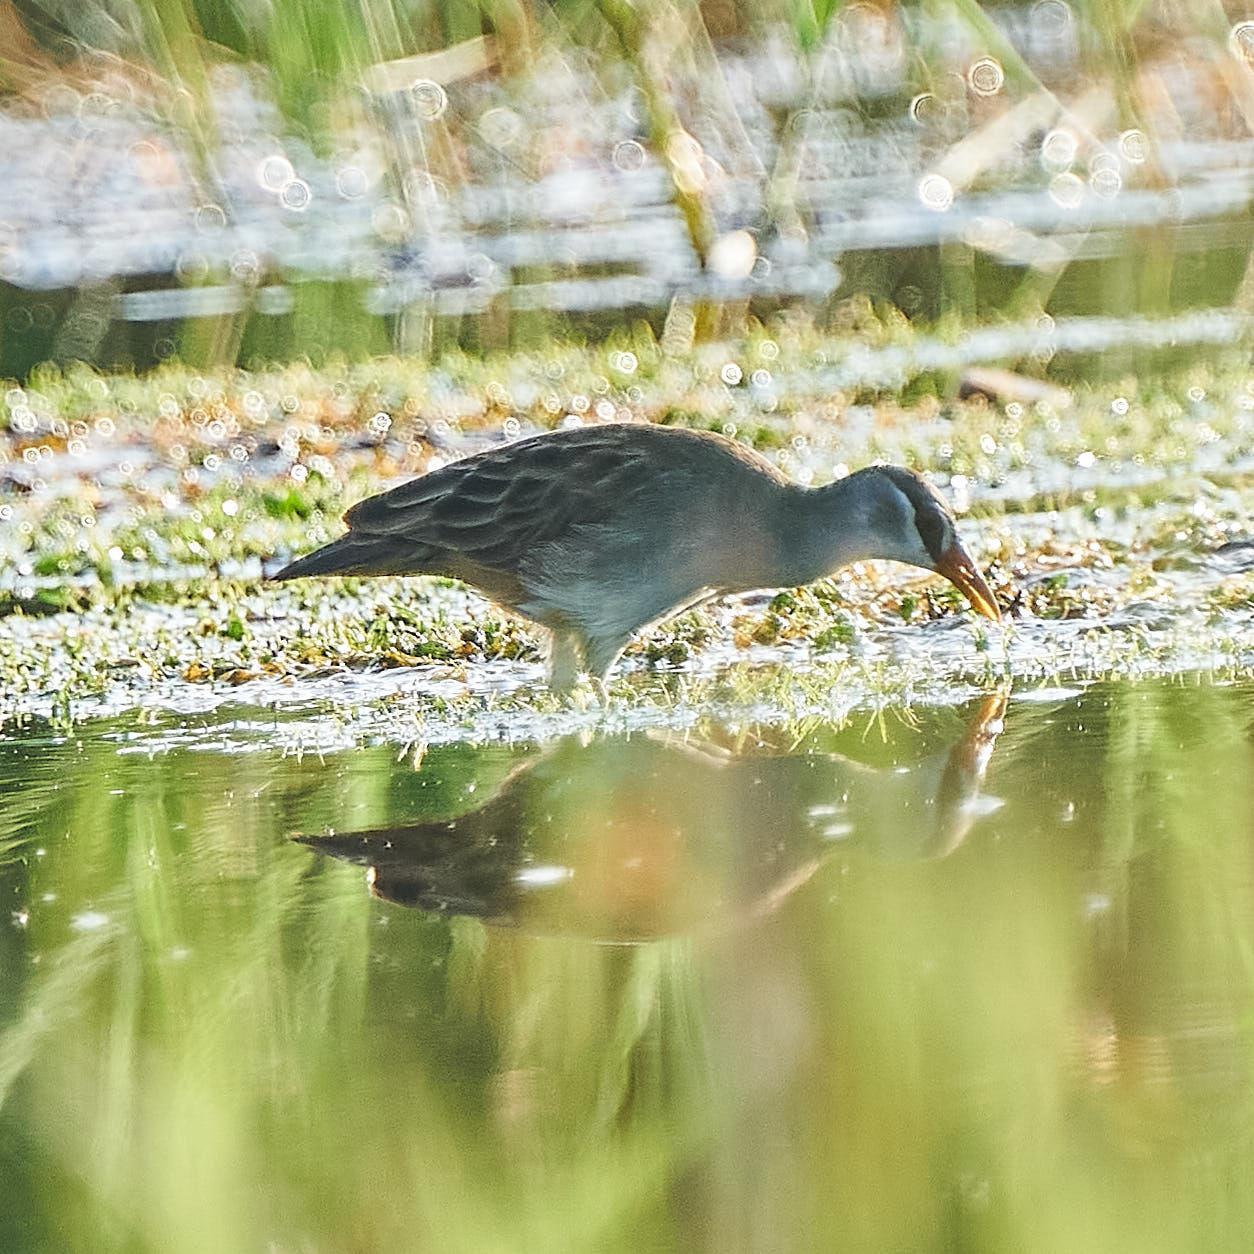 White-browed Crake Photo by Steven Cheong